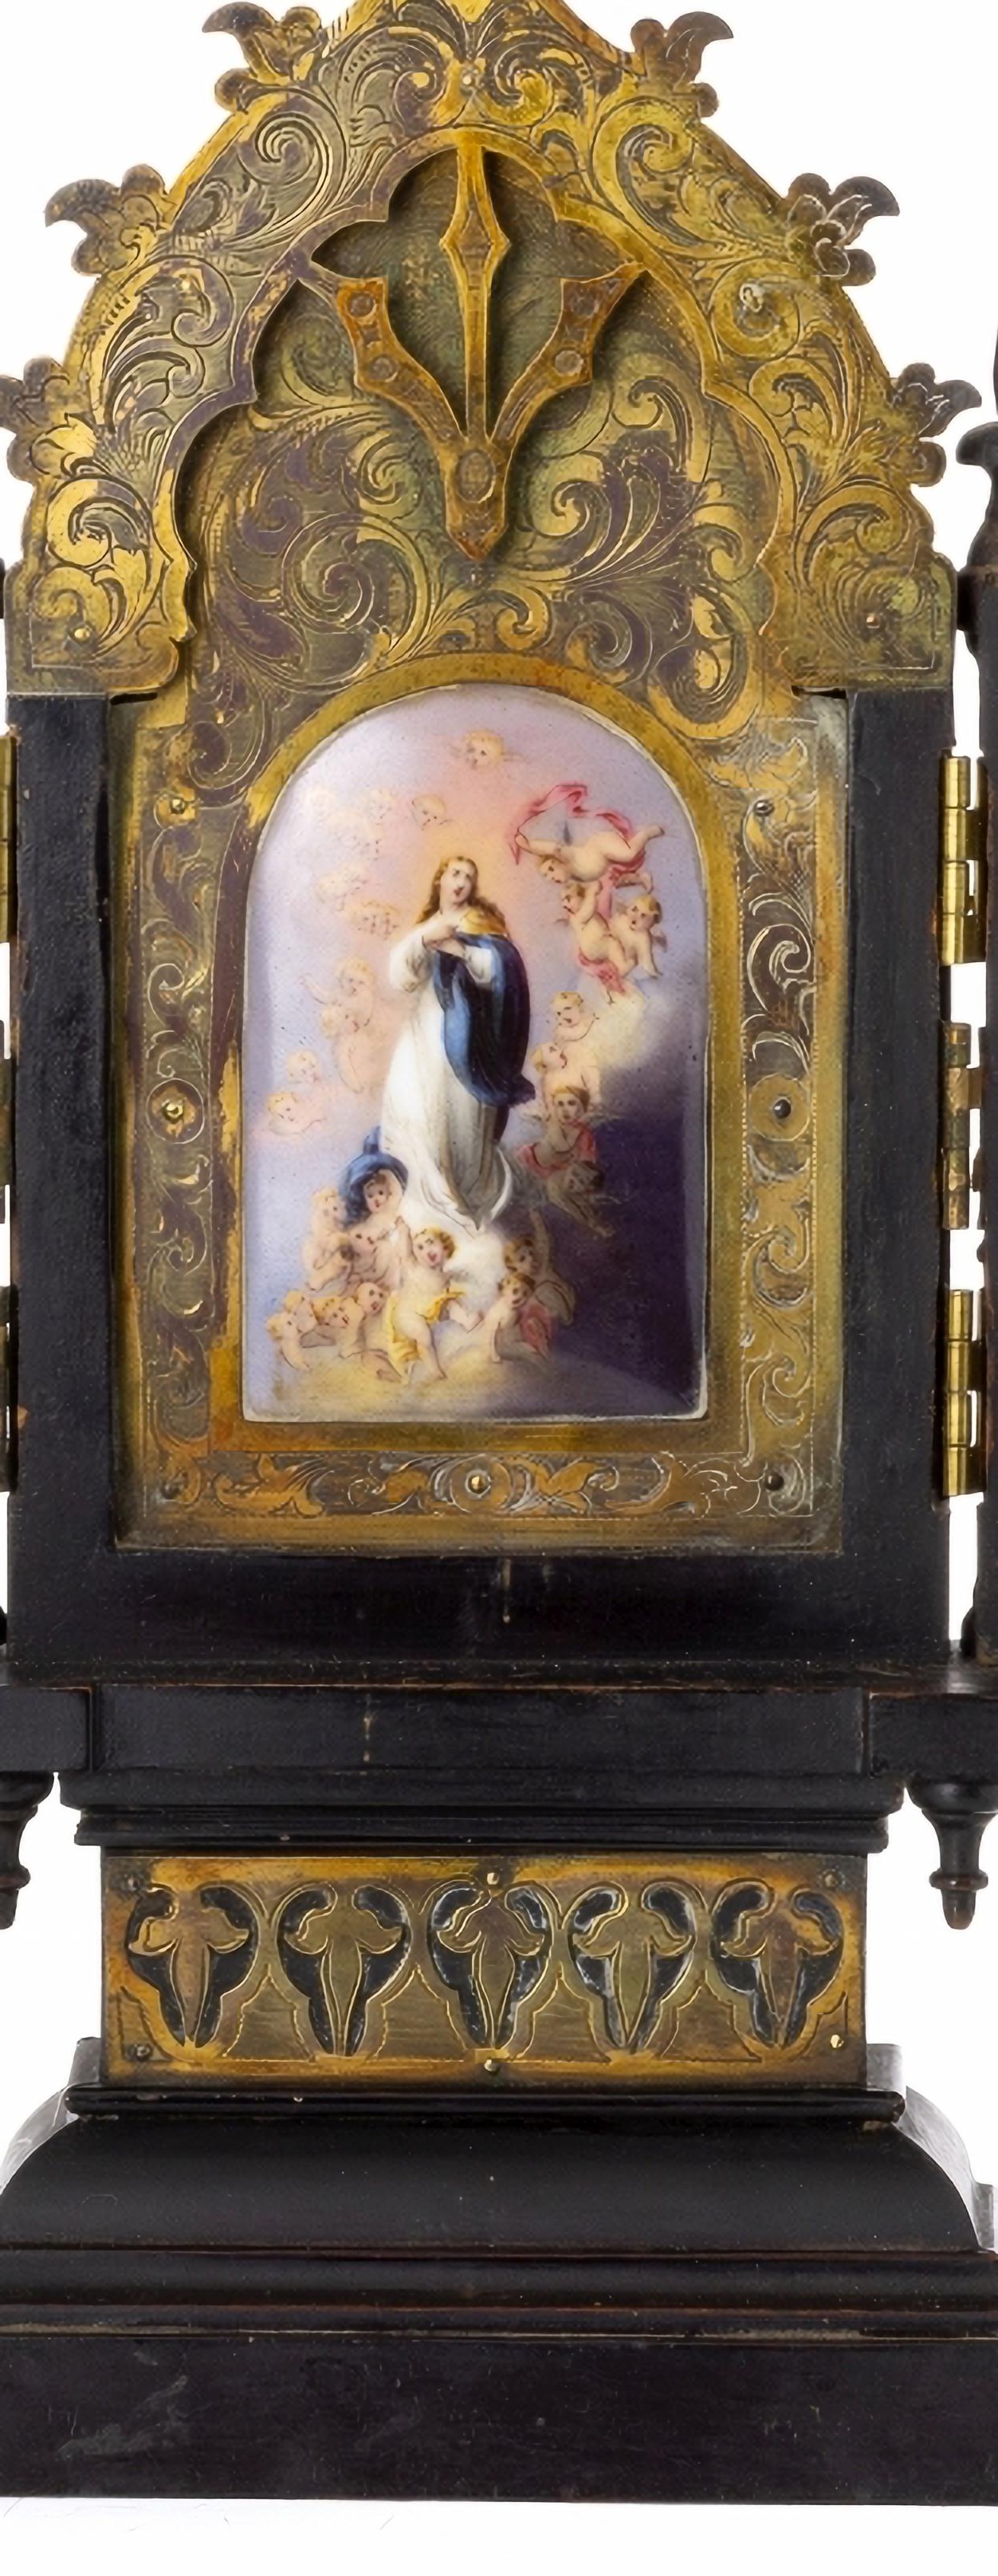 Our Lady of the Assumption Triptych
Italian,
19th Century
in ebonized wood with brass applications with an enamel plaque in the center representing the 